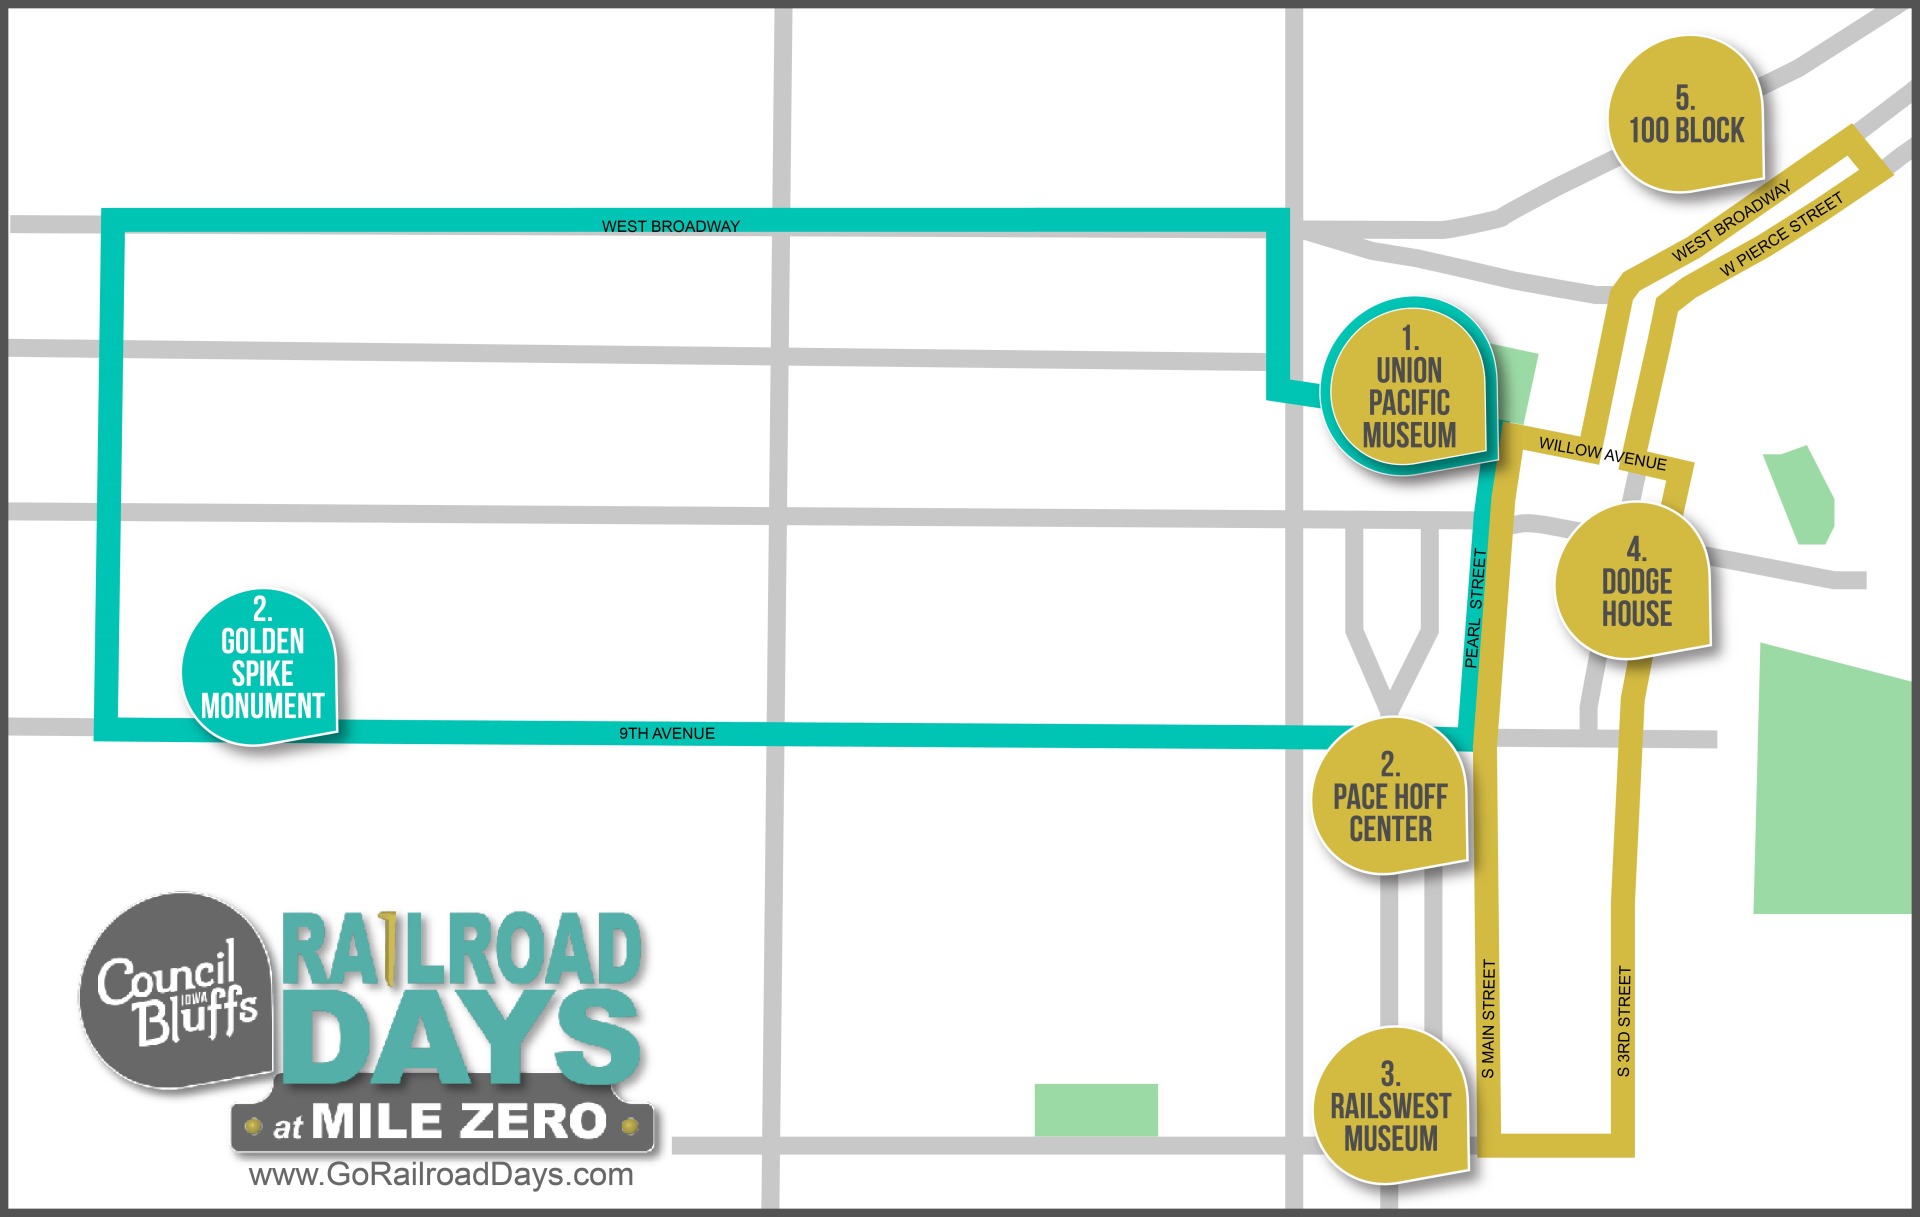 A graphic map showing the trolley route for Railroad Days